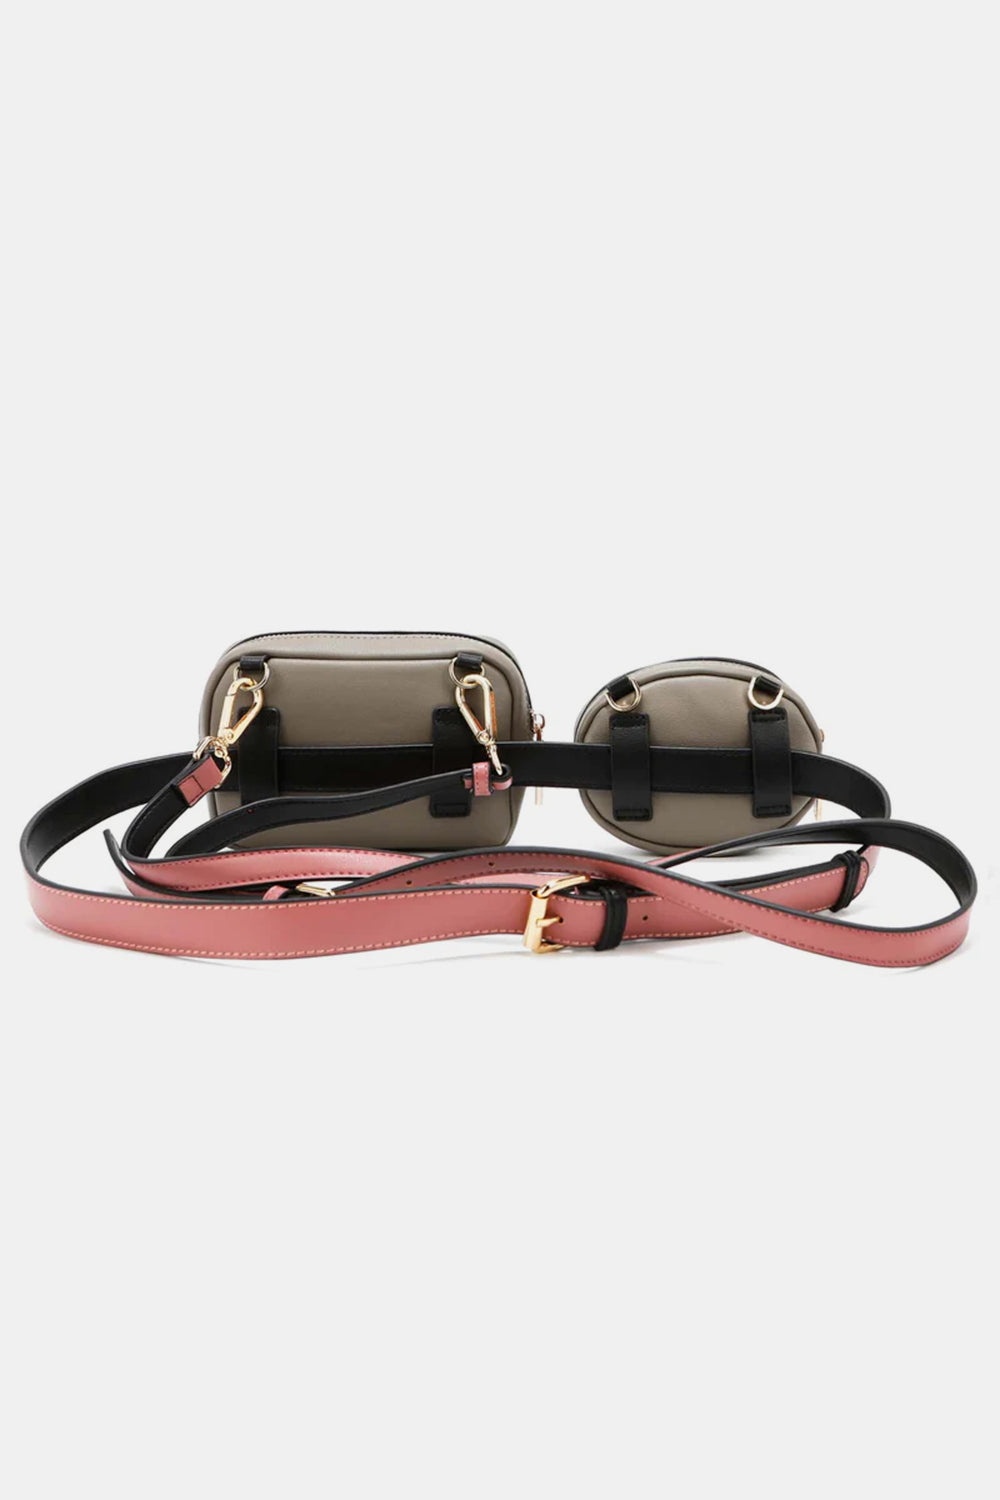 Nicole Lee USA Vegan Leather Pebbled Double Pouch Fanny Pack Zipper Various Scenic Styles